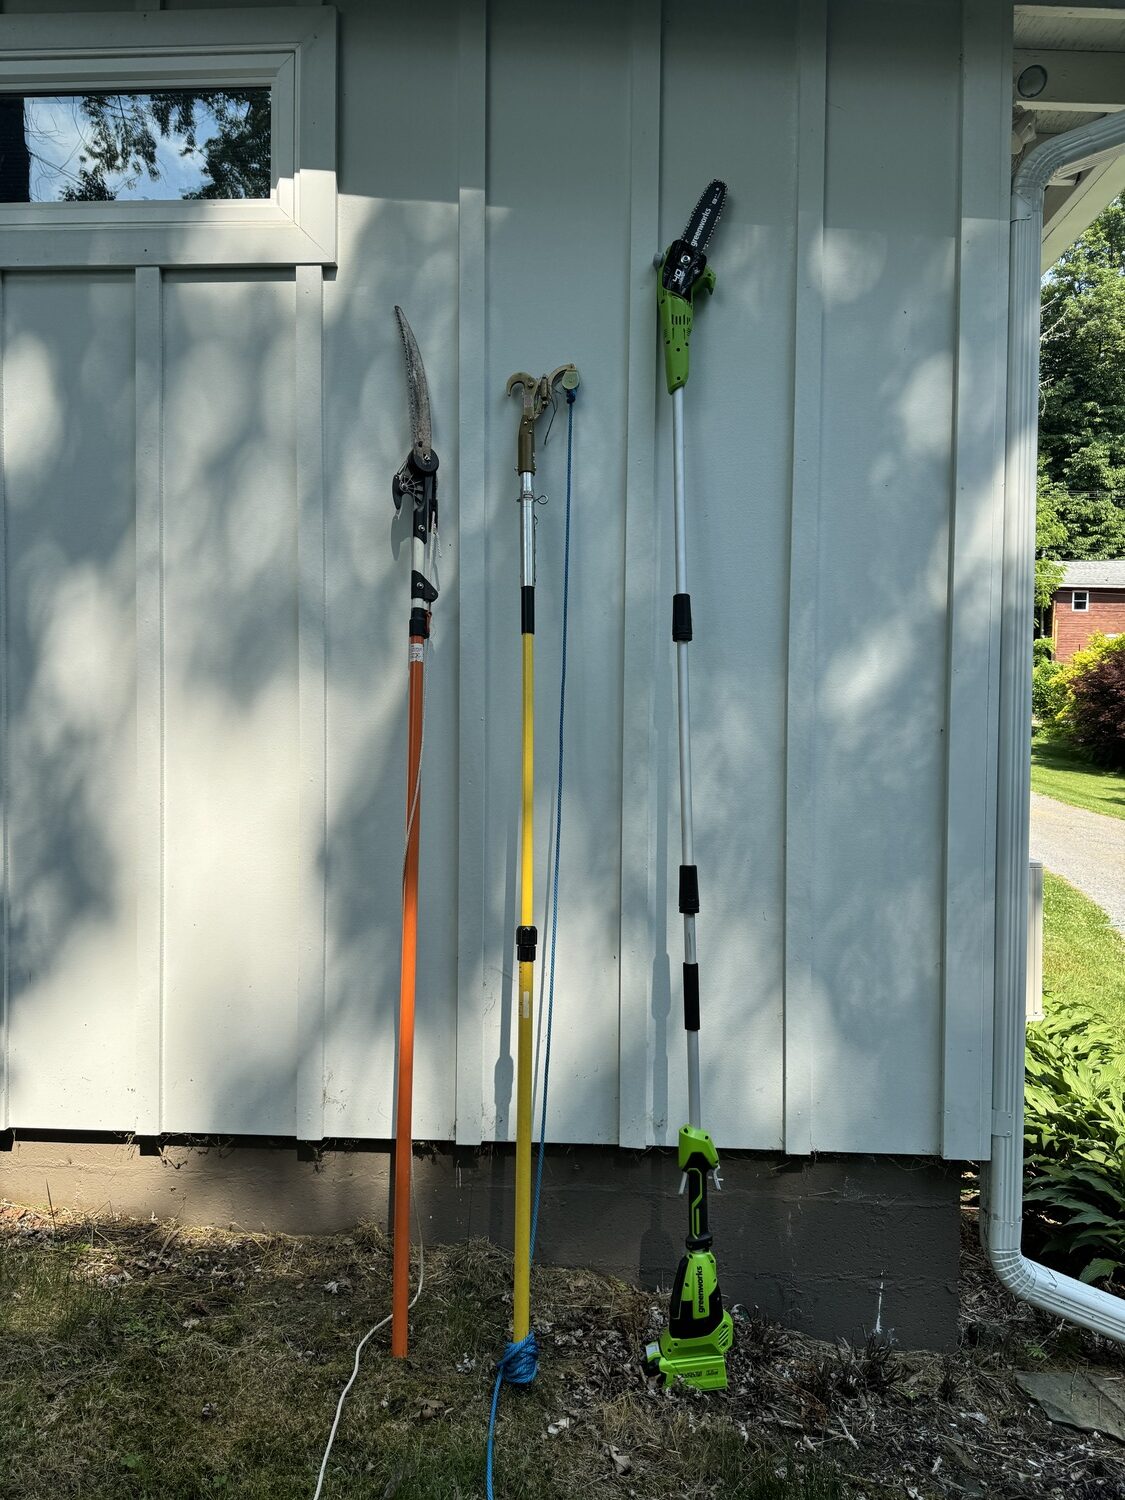 From left, a pole pruner with a lopper and a saw blade. Unextended 8 feet and will extend another 4 feet. This runs $100 to $200 for good quality. In the center is an extendible pole lopper only, also extendible another 4 feet. This will run $70 to
$150. On the right is the 40-volt Greenworks PSF303. Extended it’s 9 feet tall and can be shortened by removing one of the extensions. The price is $163 on Amazon with battery and charger. The battery works with other Greenworks tools. ANDREW MESSINGER